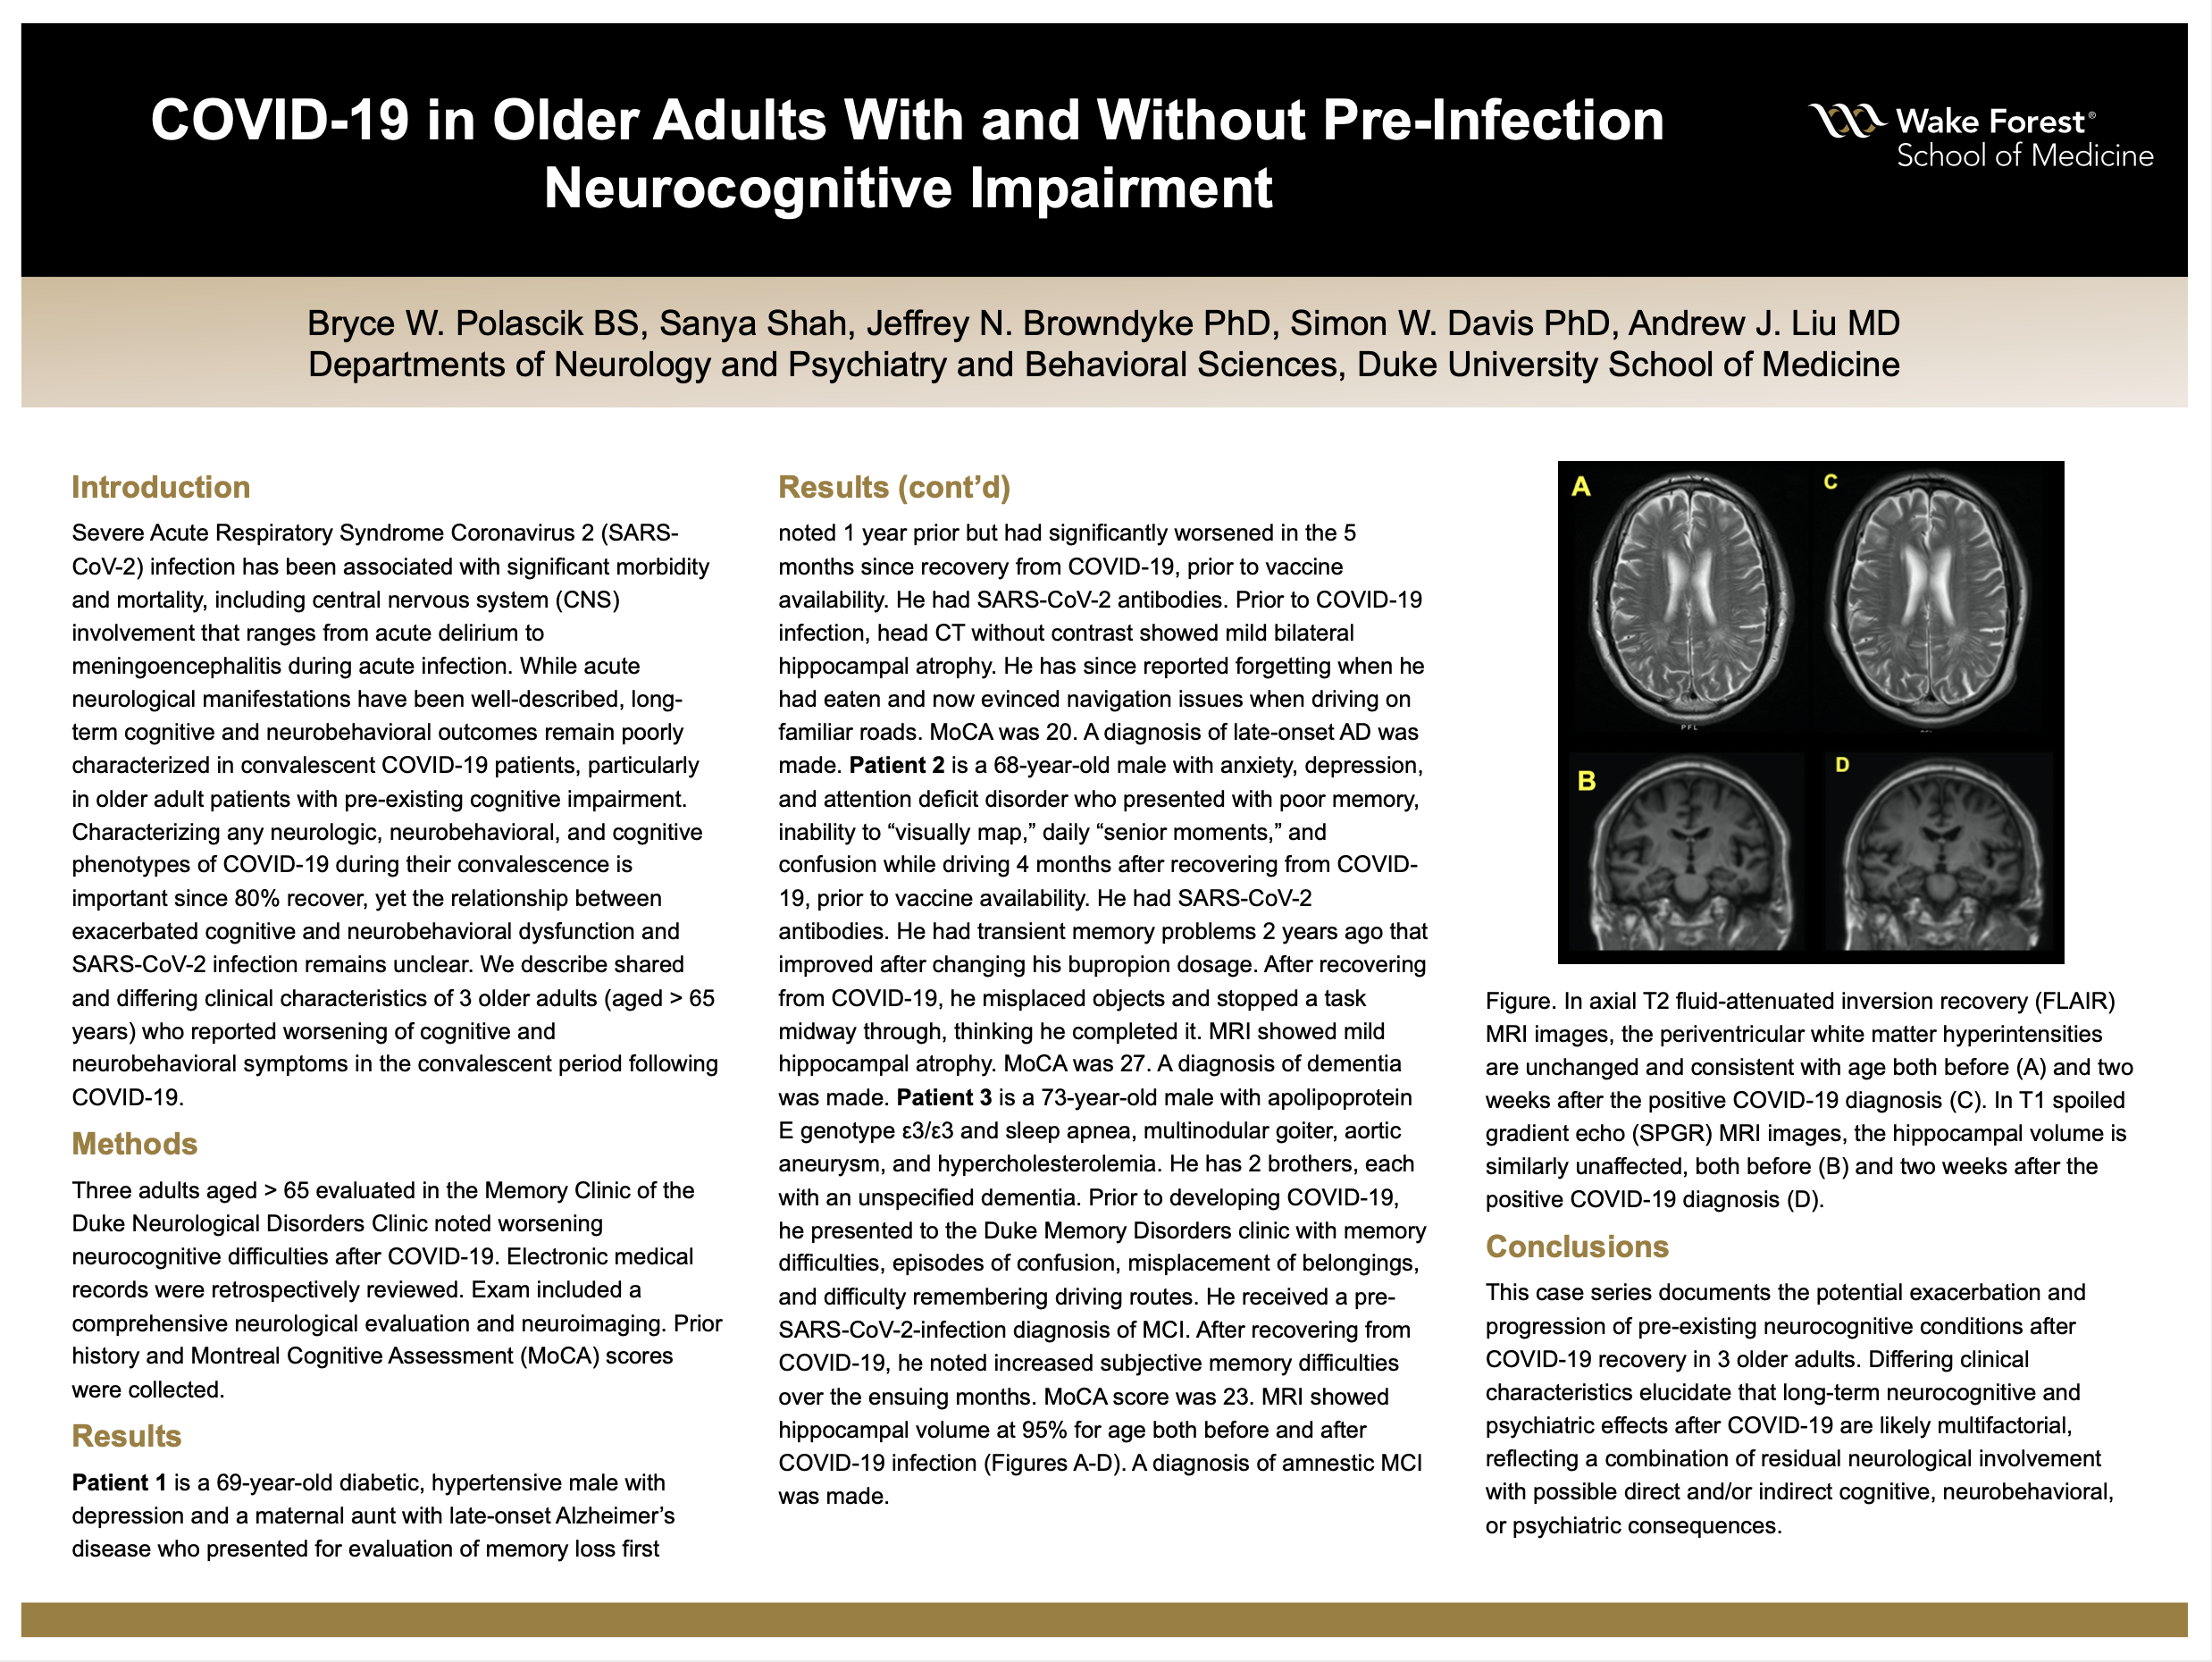 Showcase Image for COVID-19 in Older Adults With and Without Pre-Infection Neurocognitive Impairment